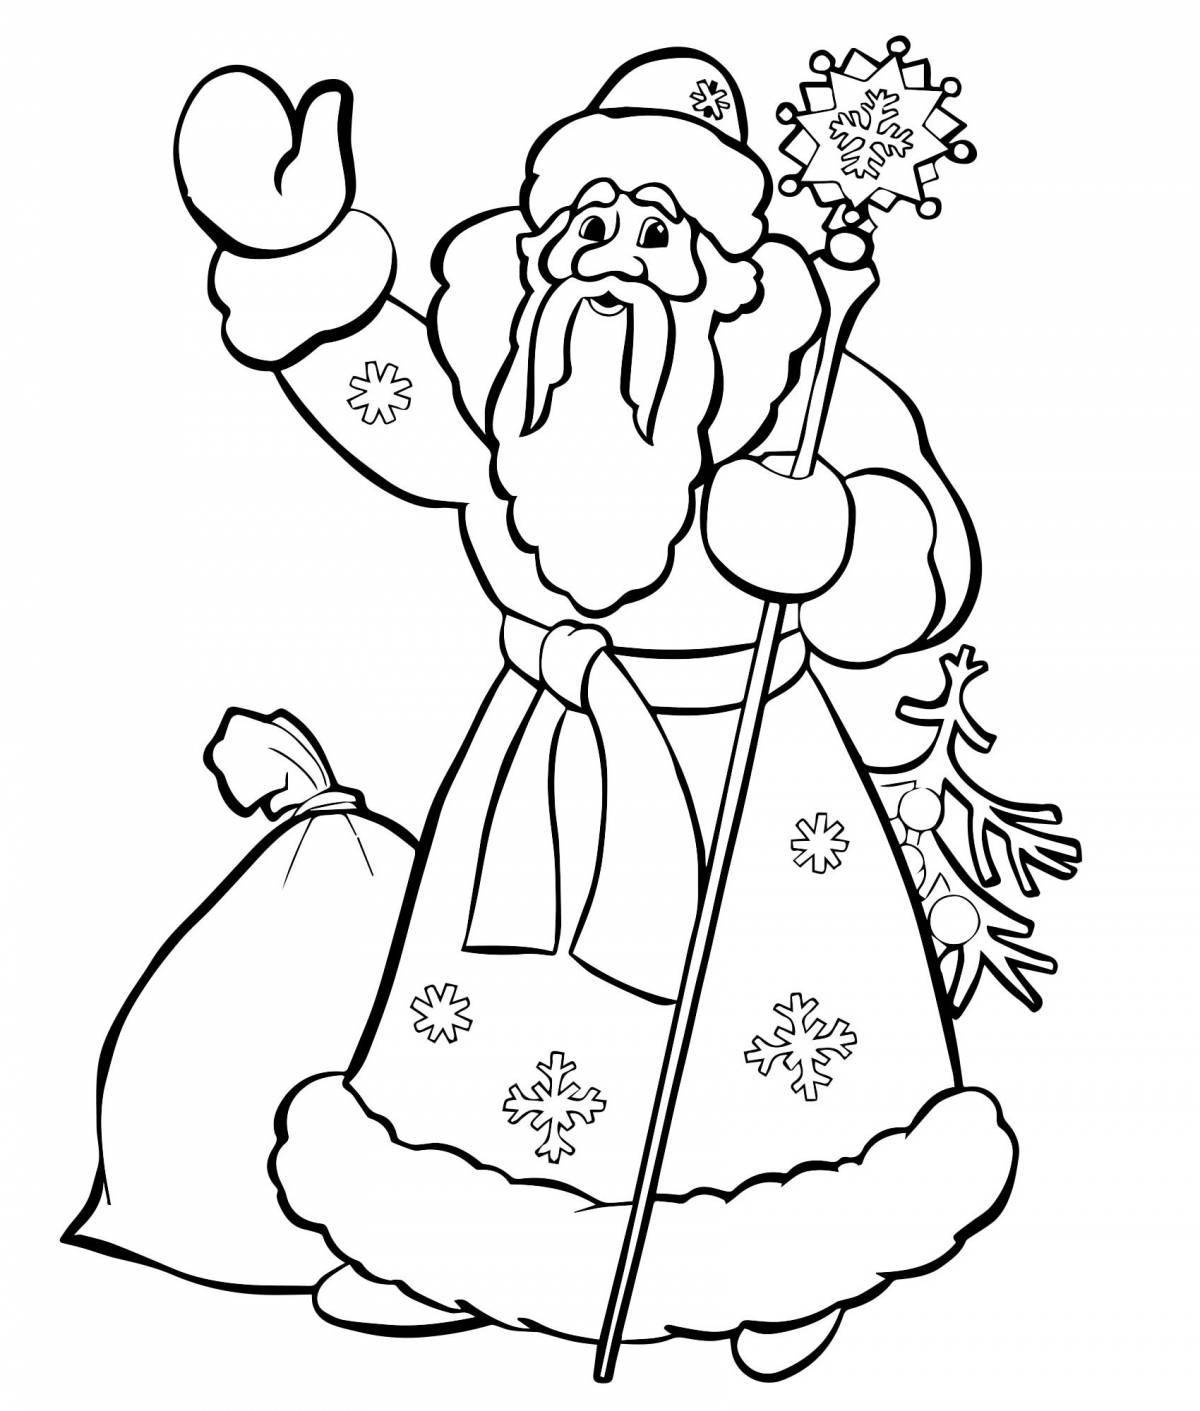 Coloring book glowing snow maiden